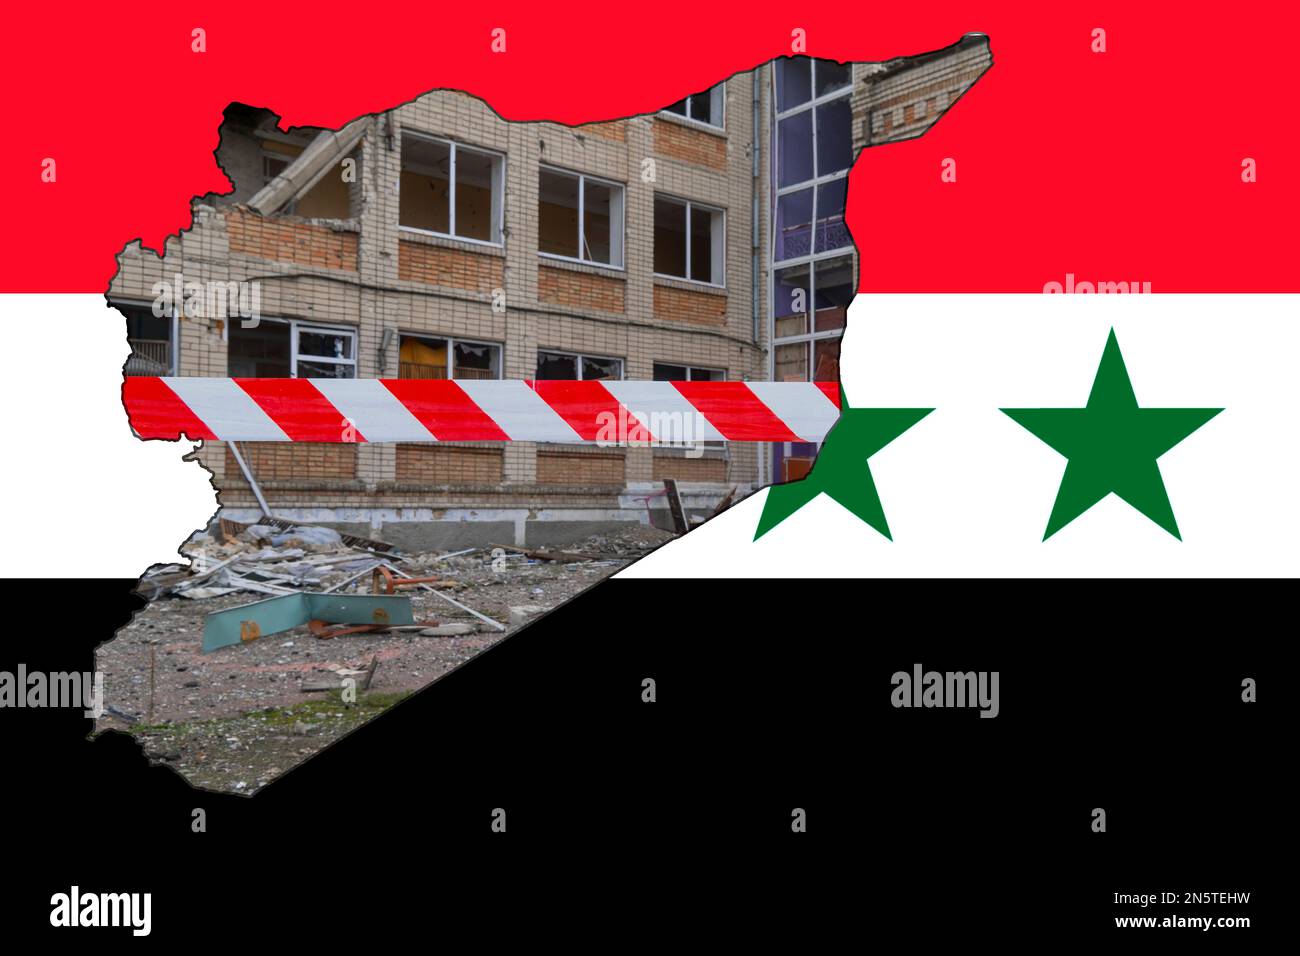 Earthquake in Syria. Damaged building. A picture in the form of a map of Syria against the background of the national flag of Syria Stock Photo